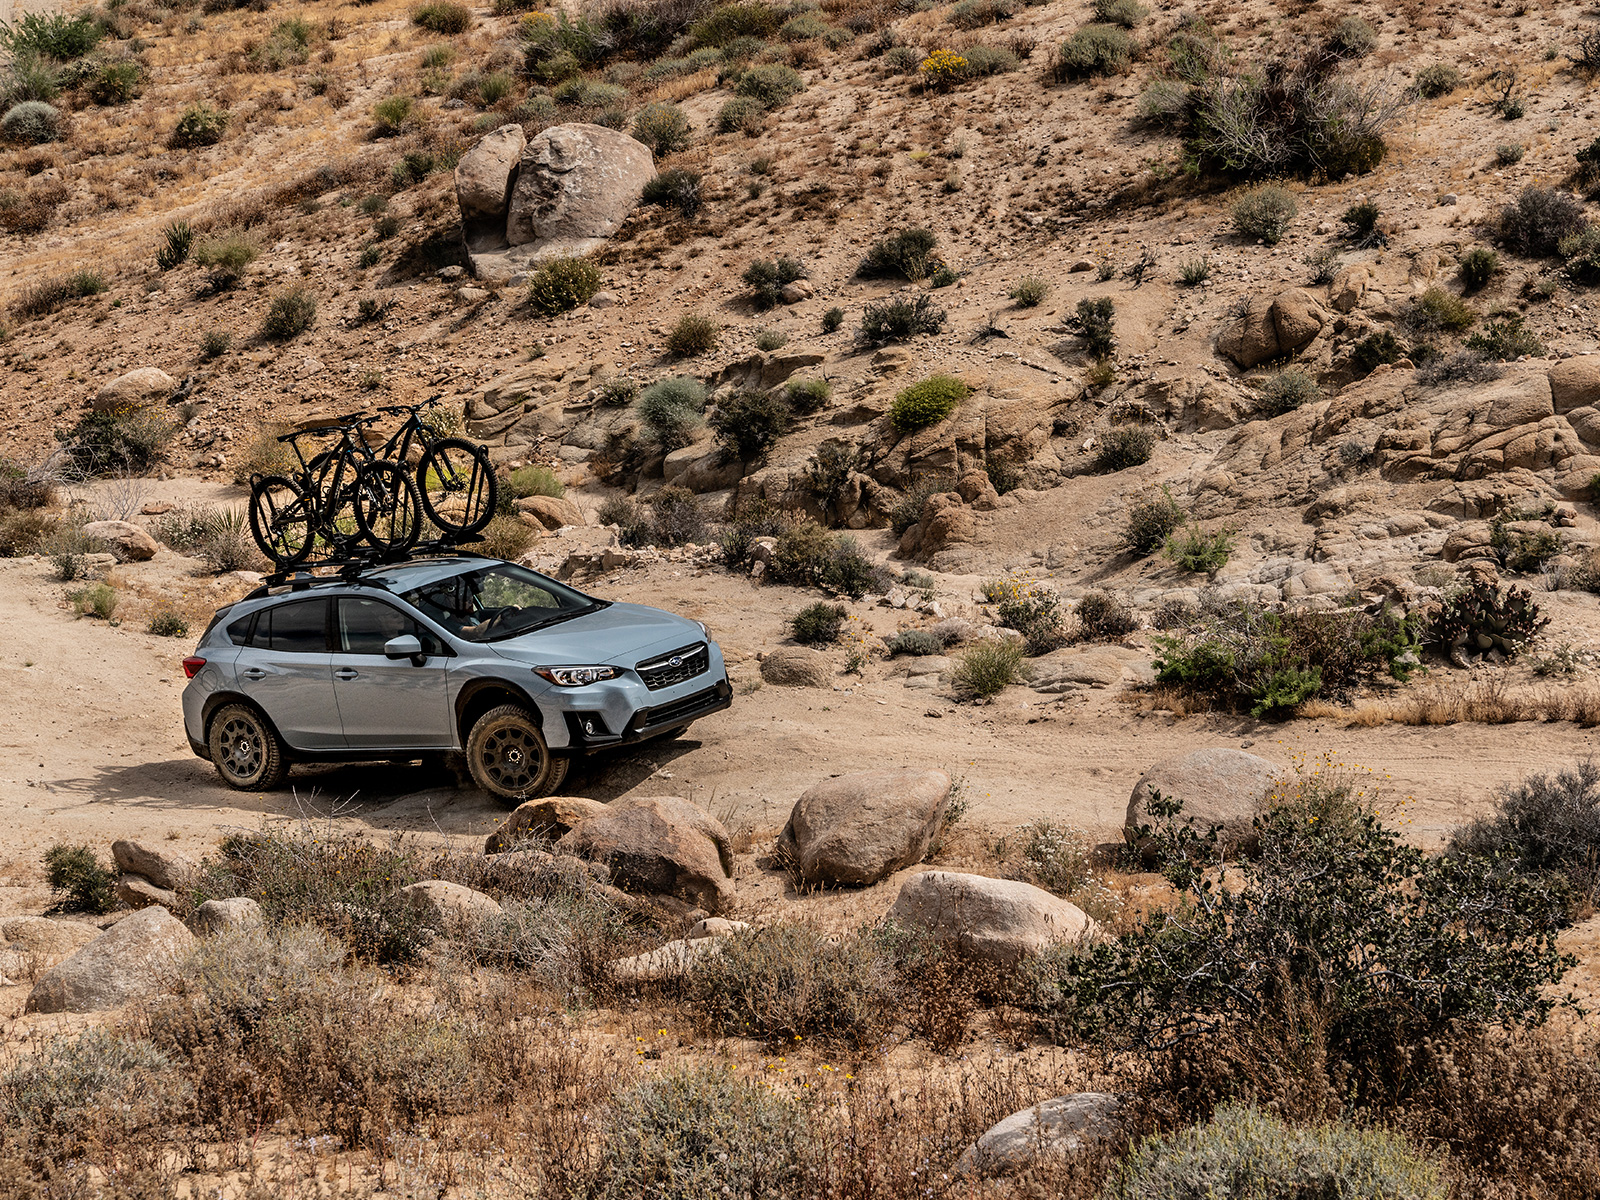 Falken Wildpeak tyres all terrain trails on a Subaru outback carrying mountain bikes on a dirt road